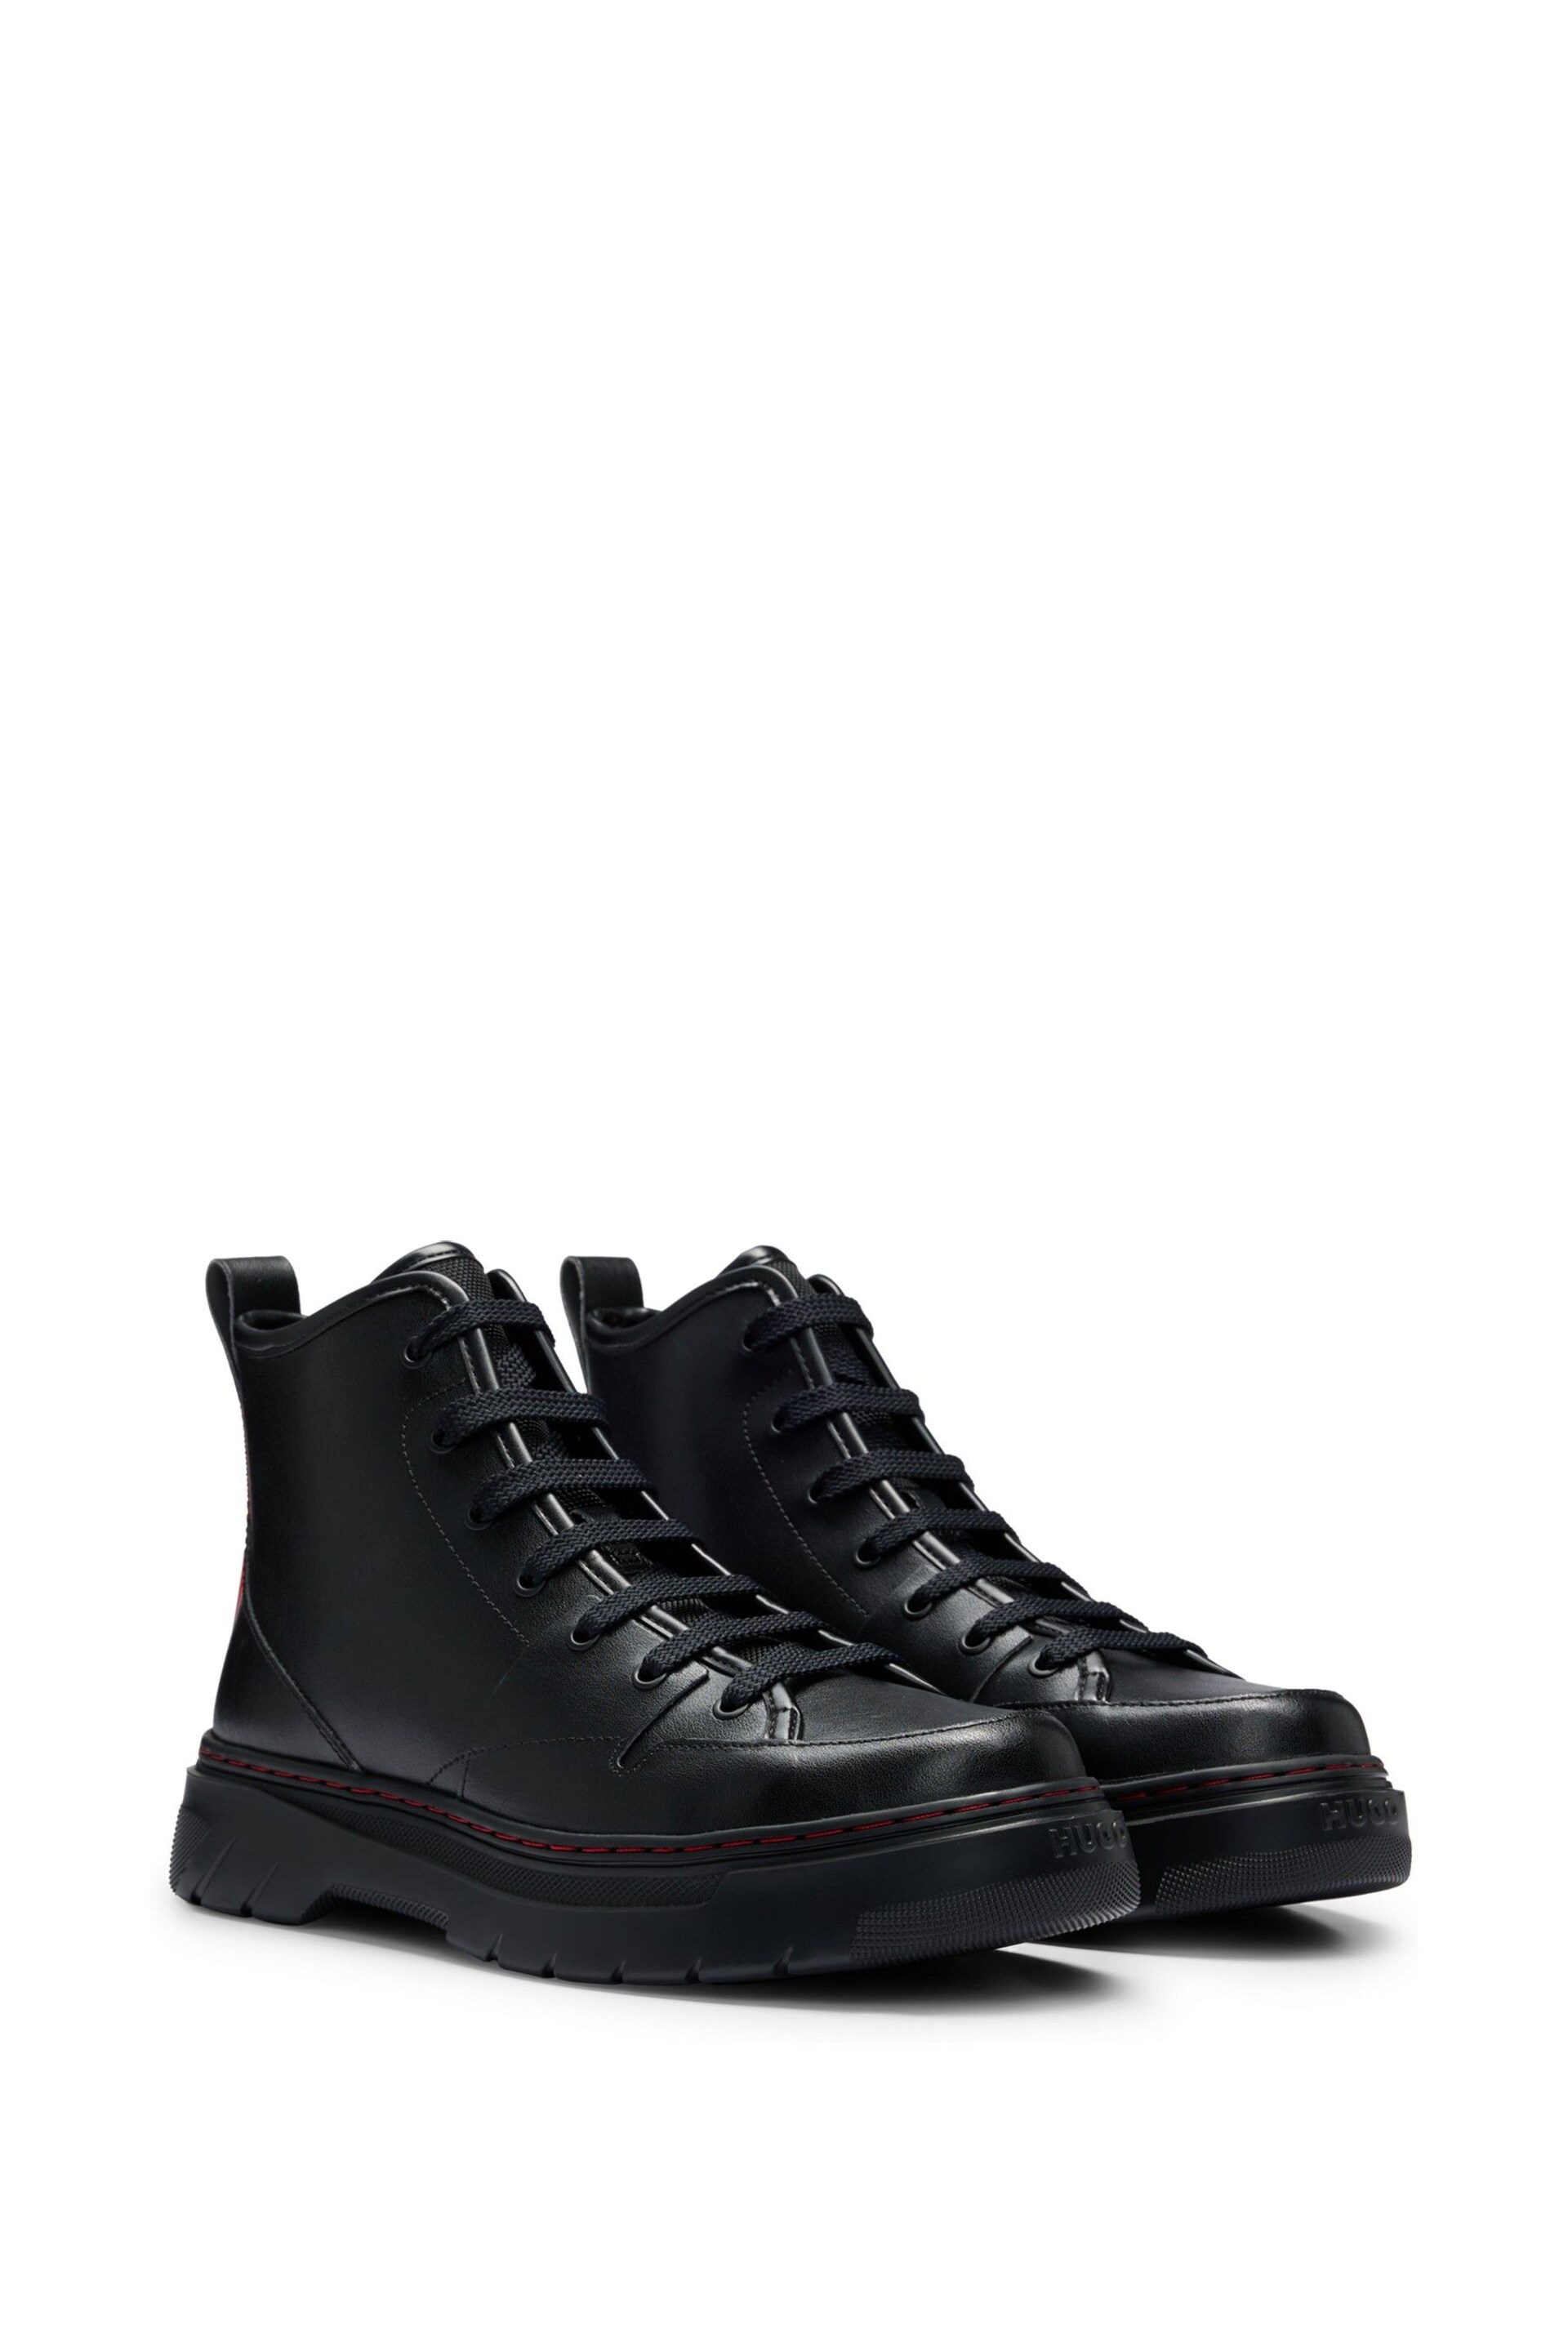 HUGO High Black Top in Split Leather With Red Logo - Image 3 of 7